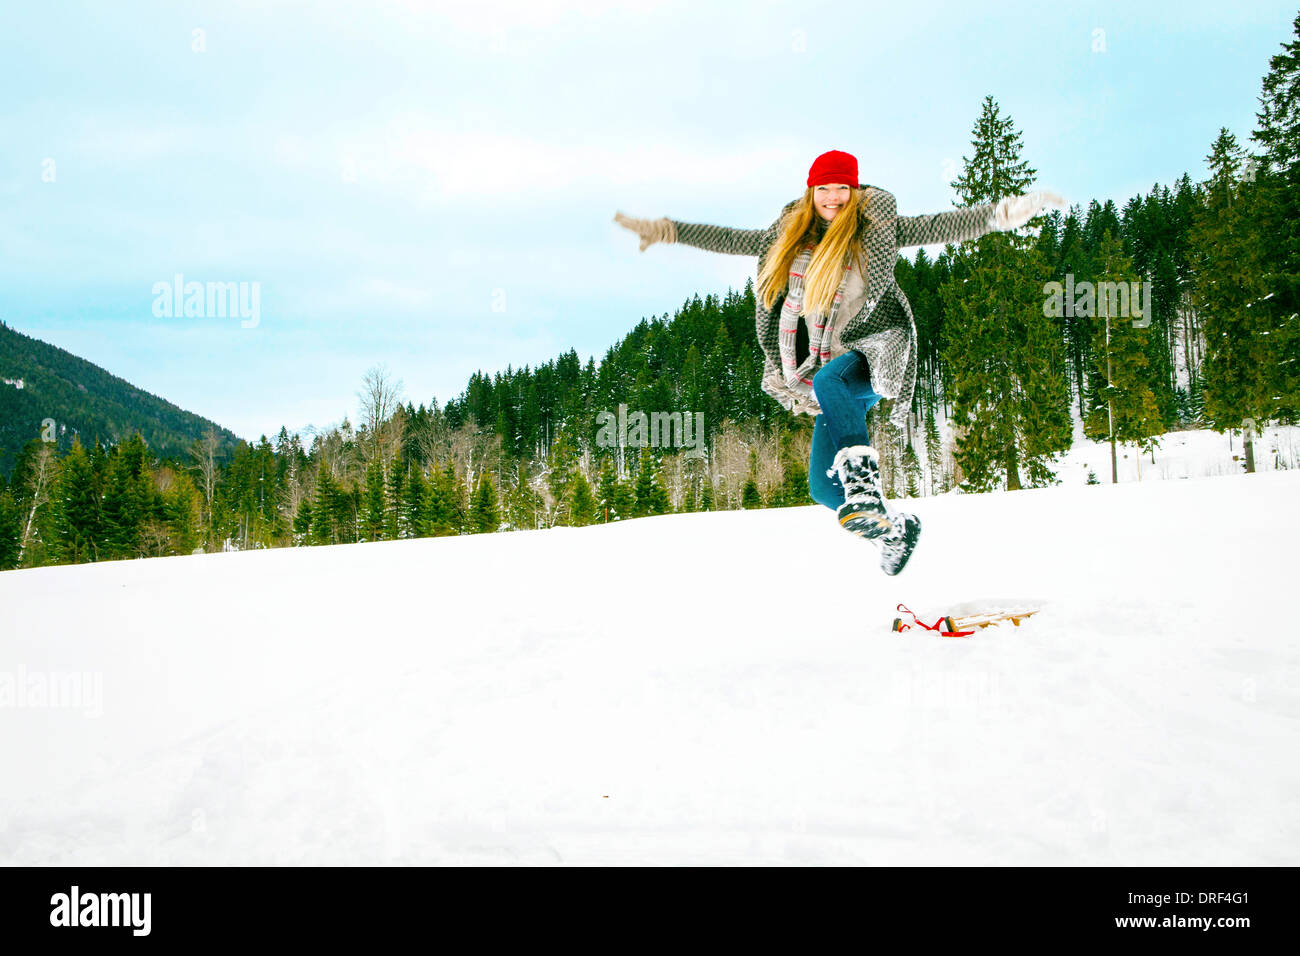 Woman Jumping In Snow, Spitzingsee, Germany Stock Photo